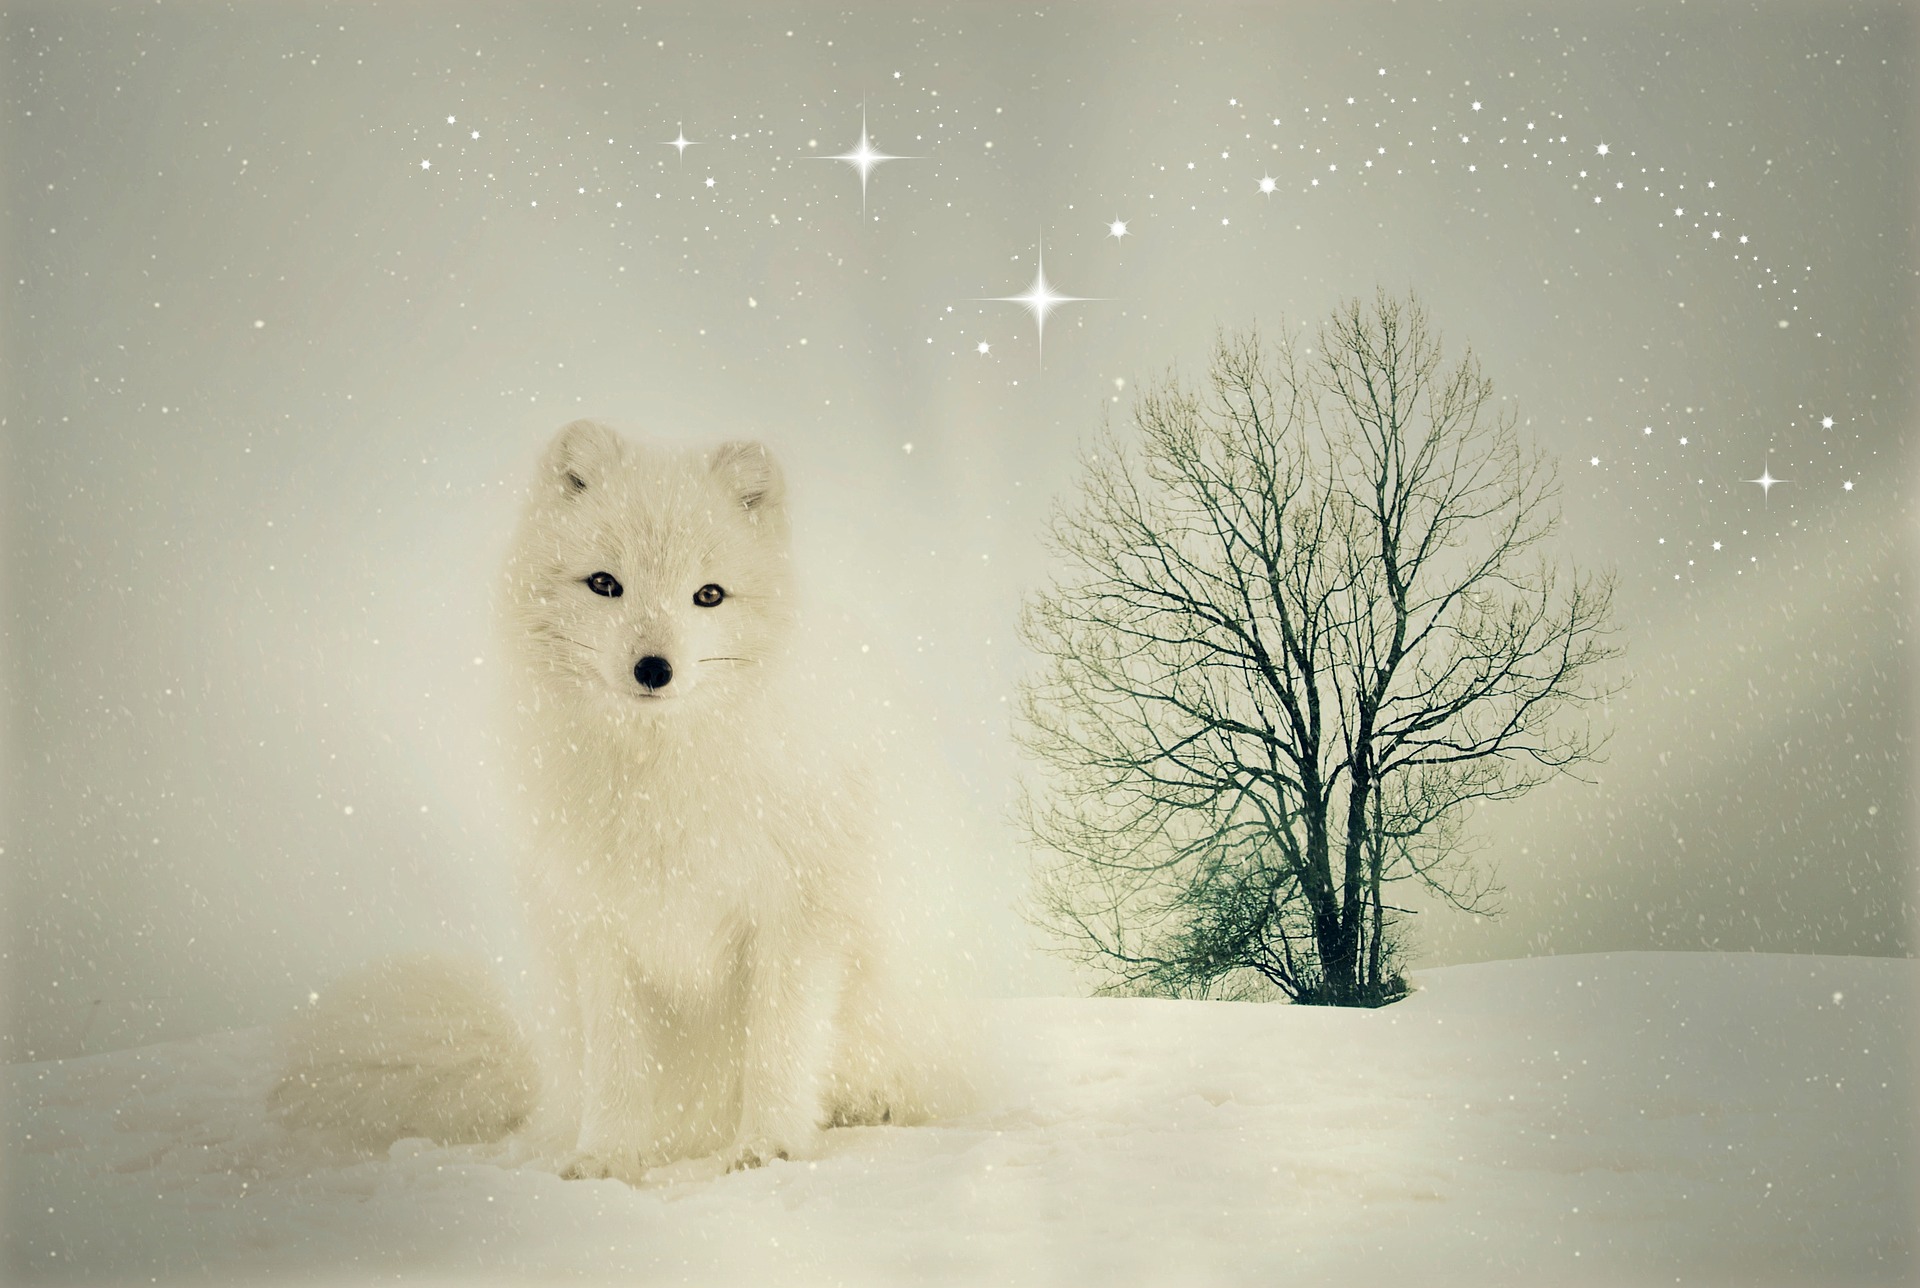 Arctic Fox in the Snow by Anja Osenberg